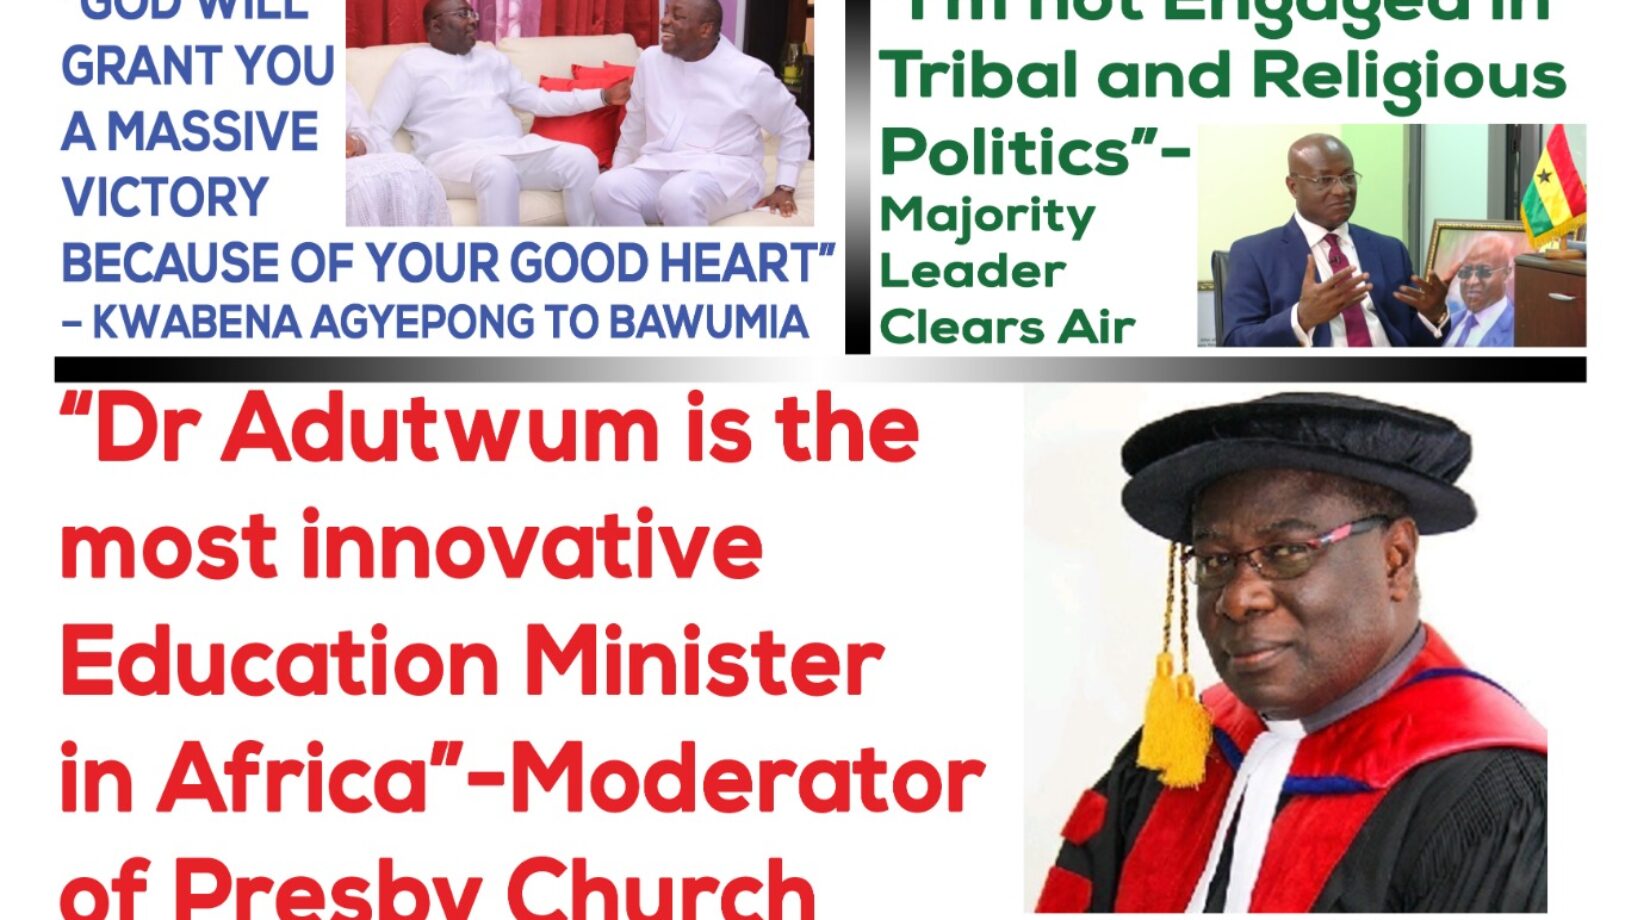 Tuesday,3rd Occasion,2023 Edition of The New Trust Newspaper